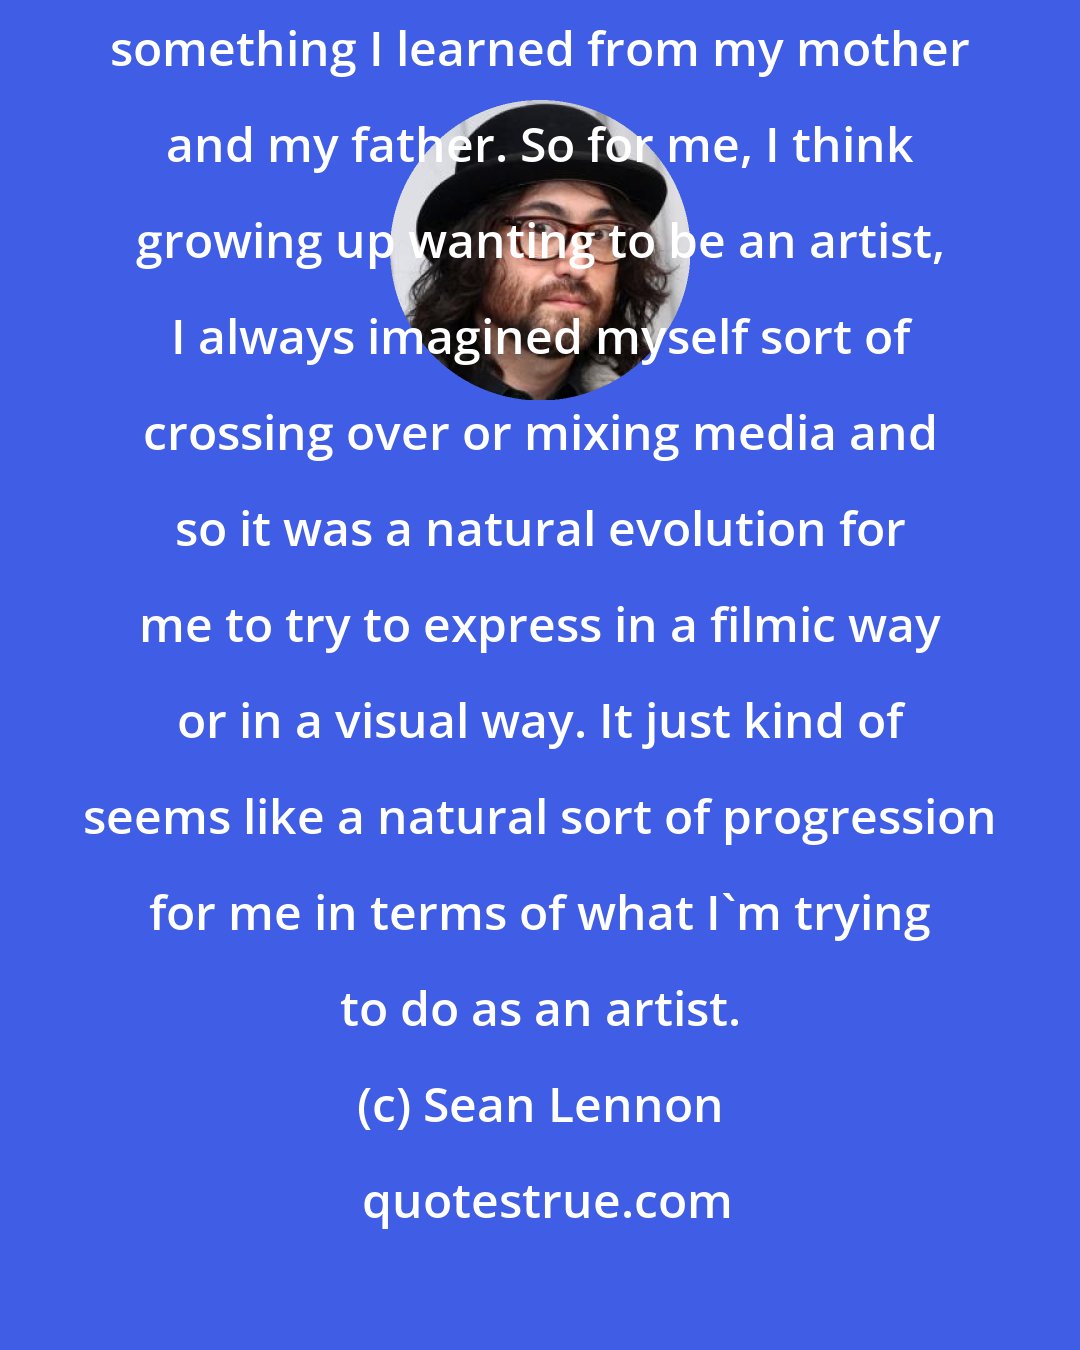 Sean Lennon: The idea of using media for expressing yourself artistically is kind of something I learned from my mother and my father. So for me, I think growing up wanting to be an artist, I always imagined myself sort of crossing over or mixing media and so it was a natural evolution for me to try to express in a filmic way or in a visual way. It just kind of seems like a natural sort of progression for me in terms of what I'm trying to do as an artist.